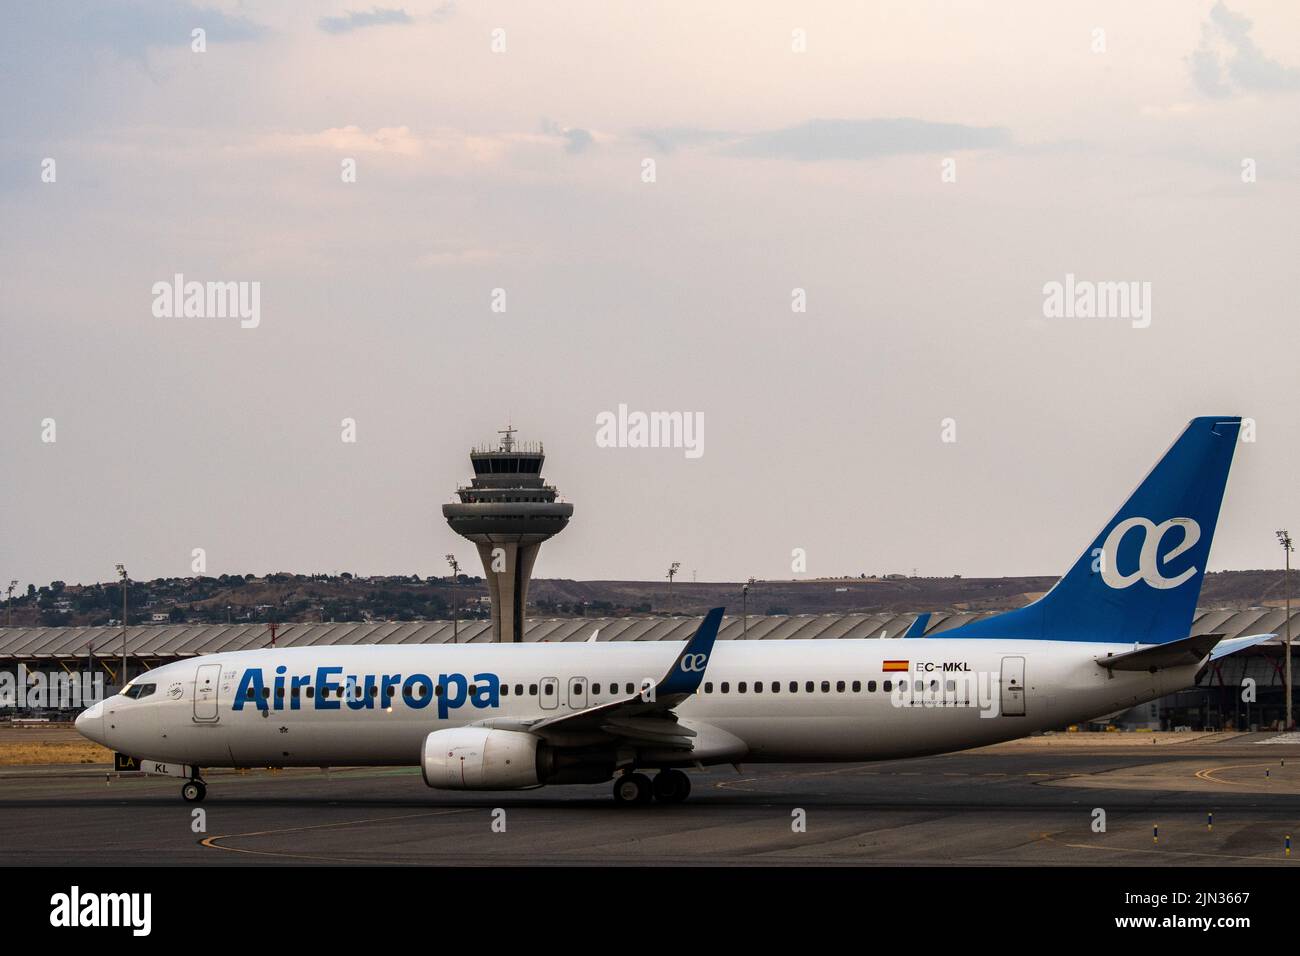 An Air Europa airplane in seen on the runway at Adolfo Suarez Madrid Barajas Airport passing by the air traffic control tower. Stock Photo